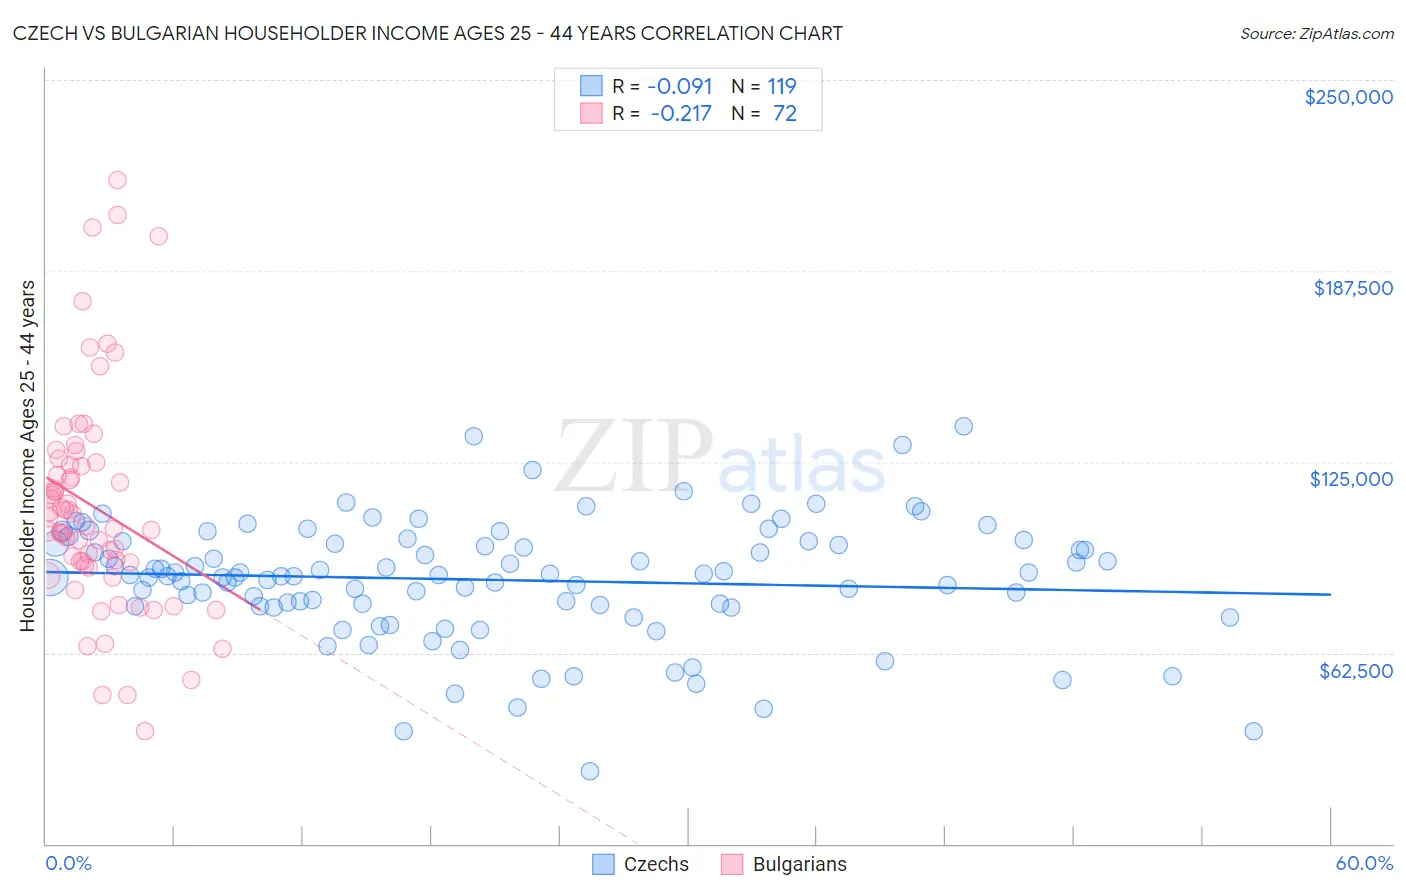 Czech vs Bulgarian Householder Income Ages 25 - 44 years